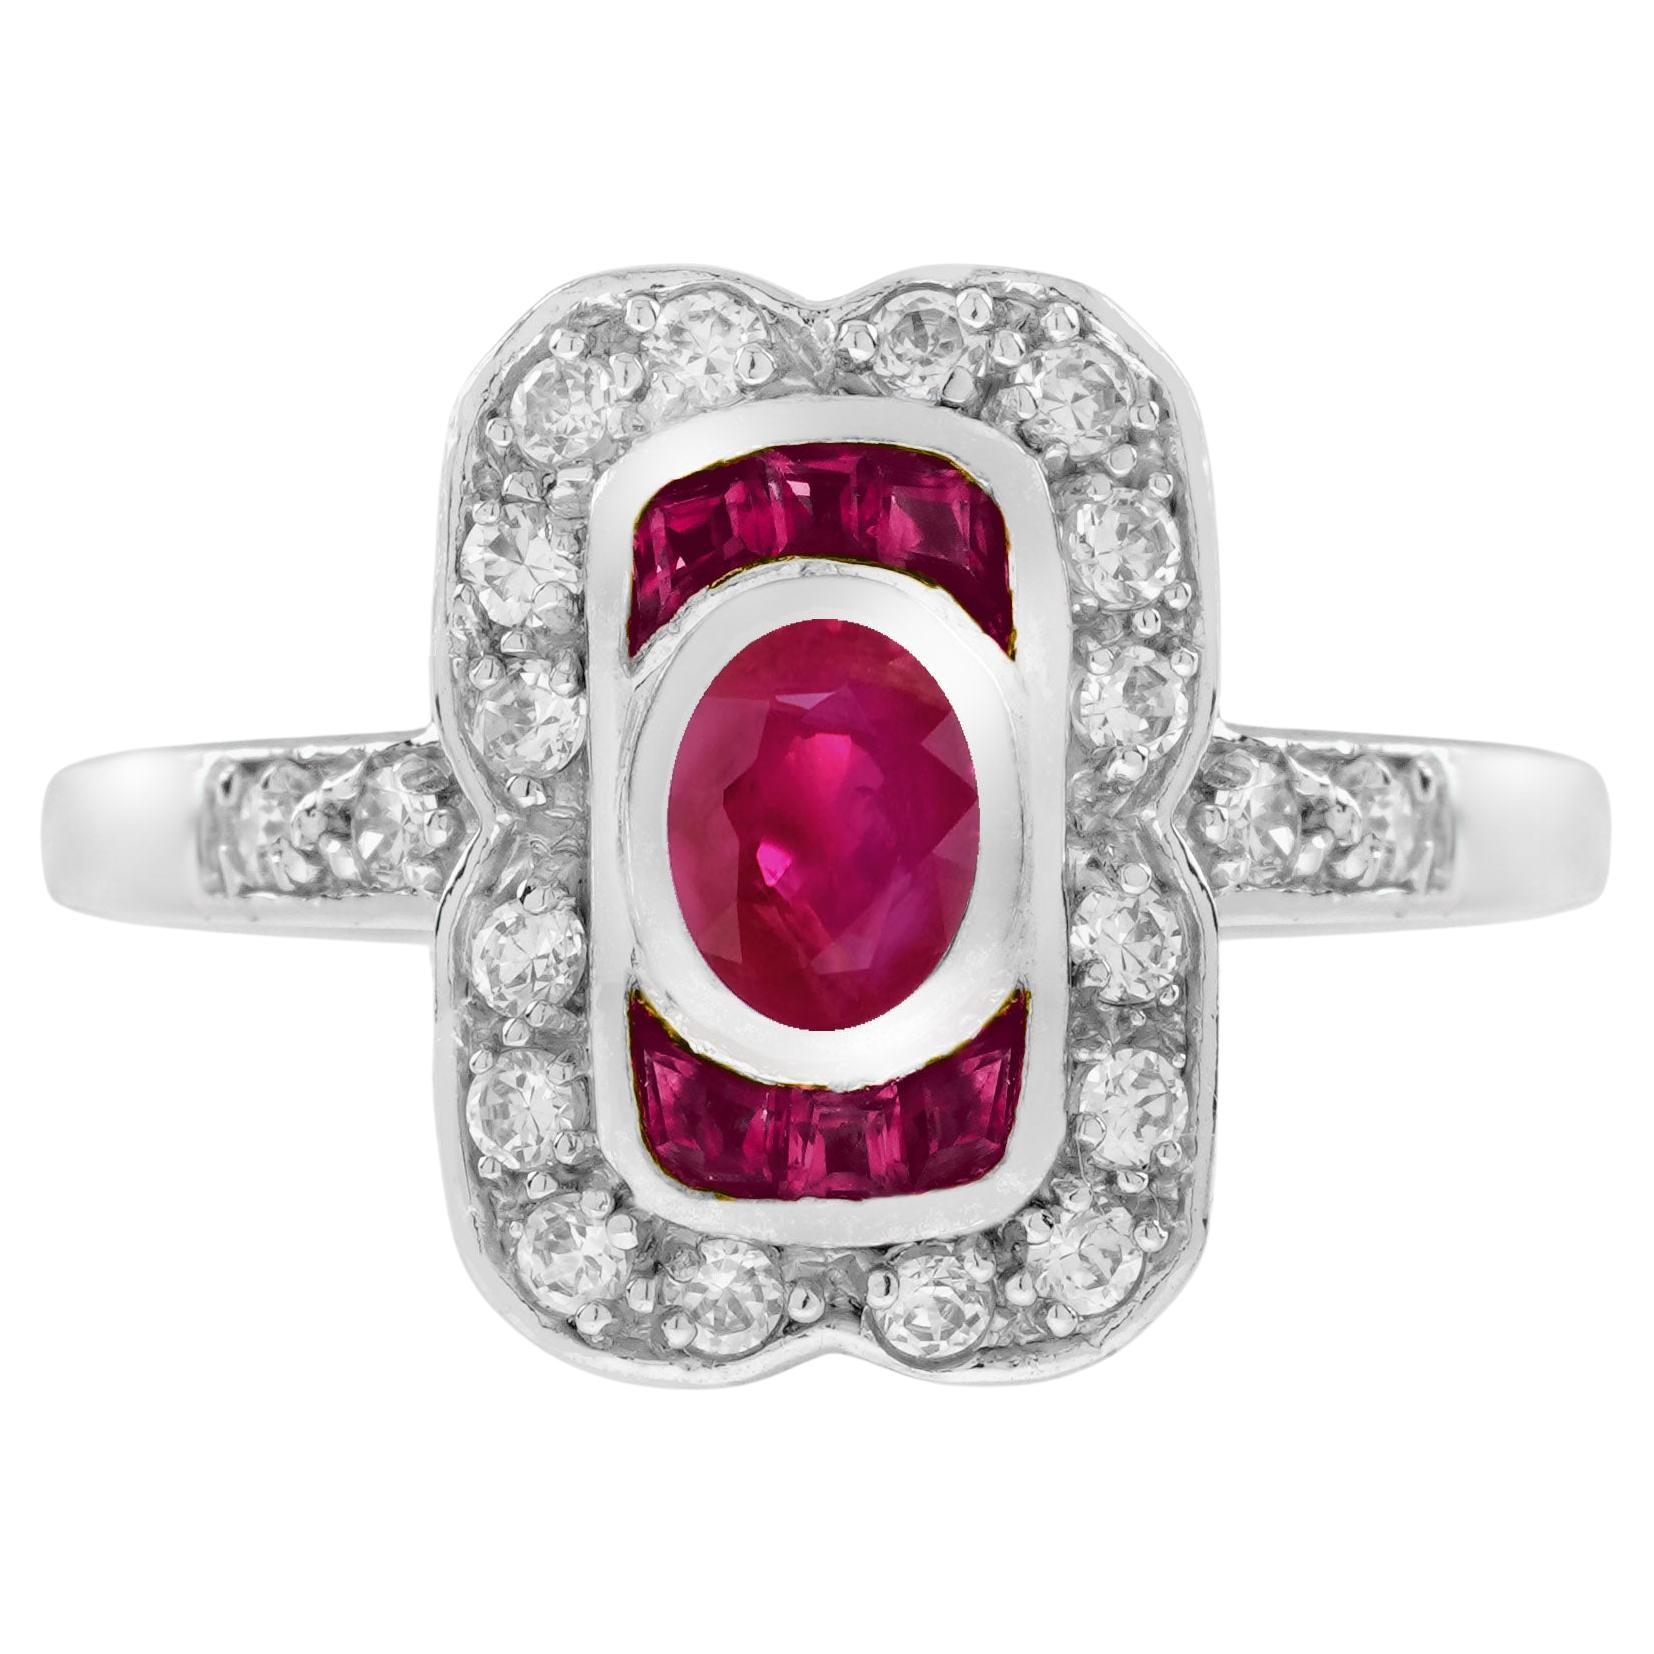 Oval Ruby and Diamond Art Deco Style Engagement Ring in 18K White Gold